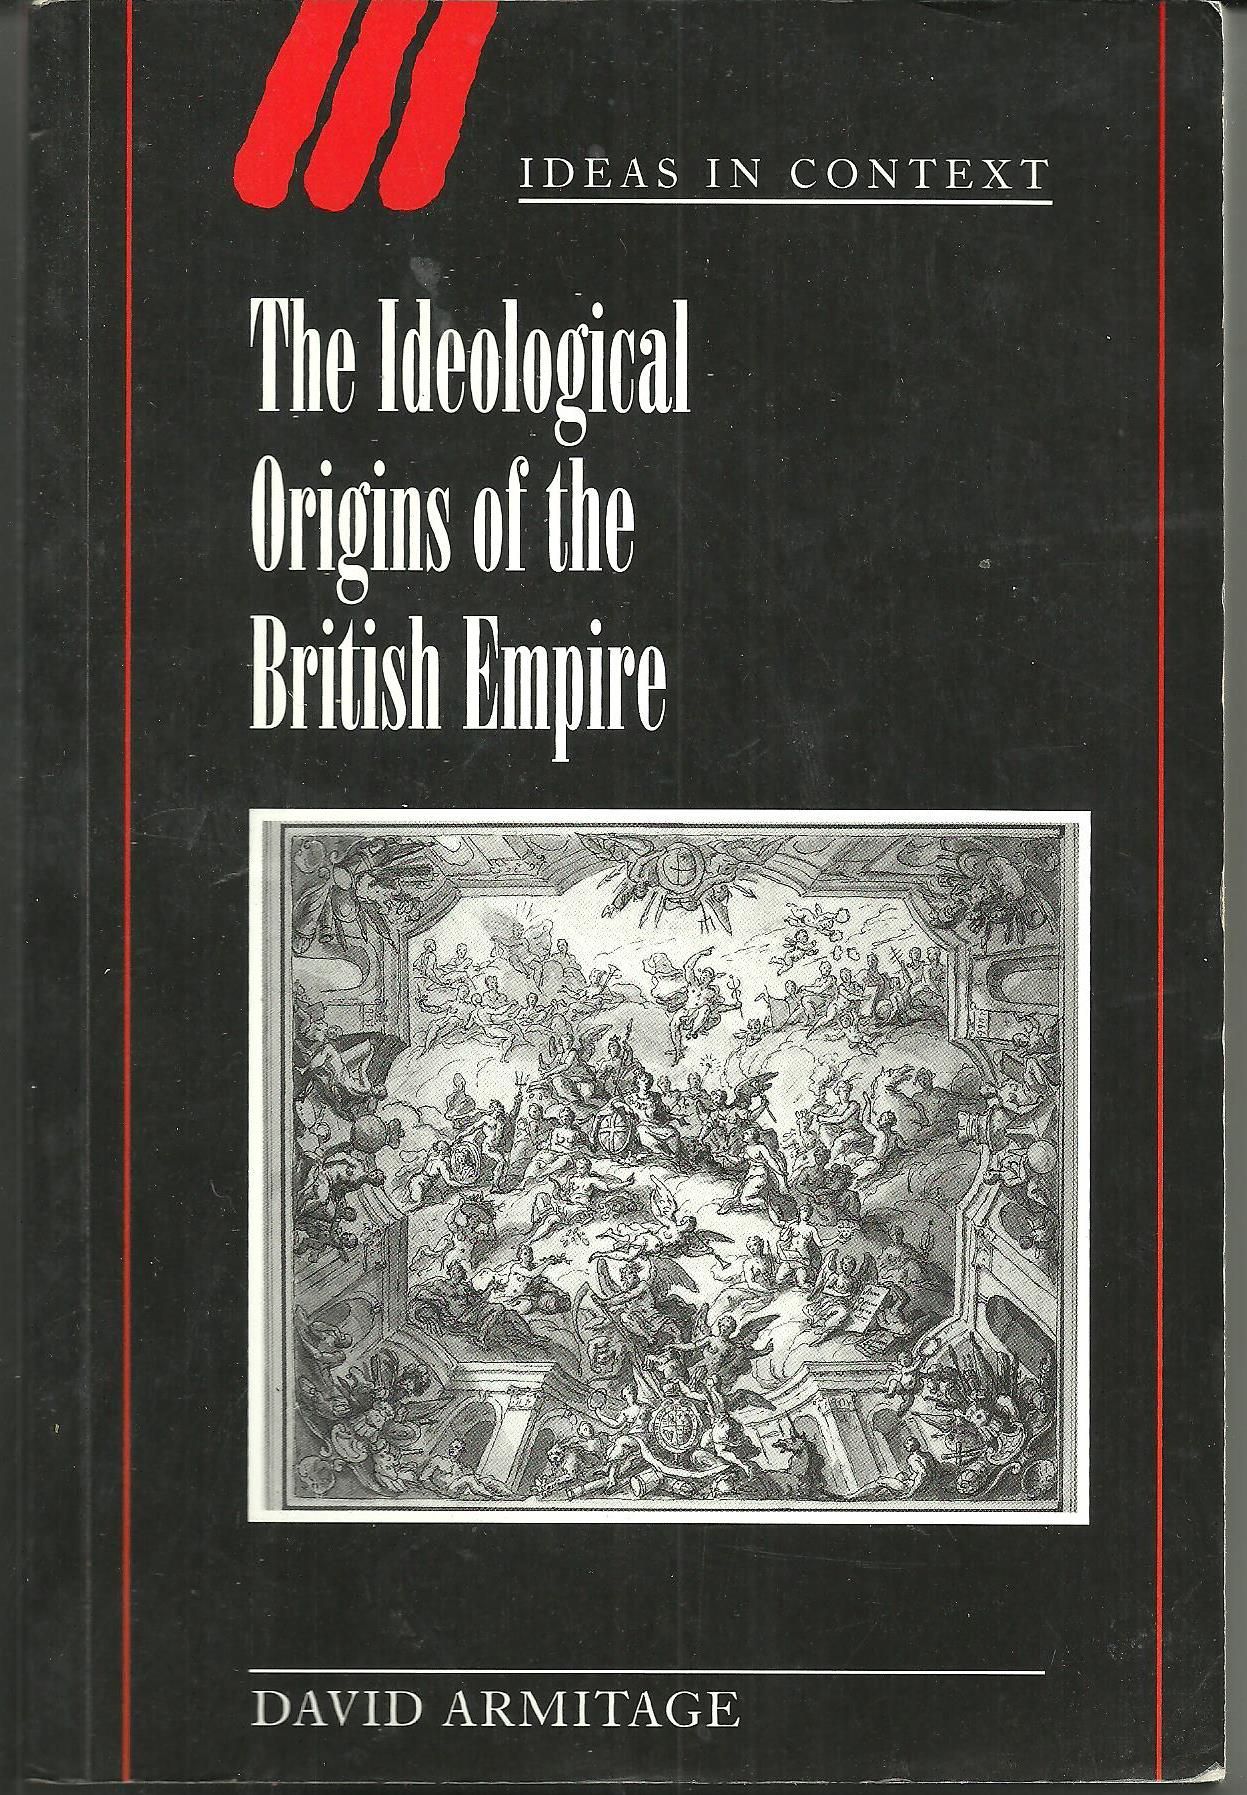 The Ideological origins of the British Empire